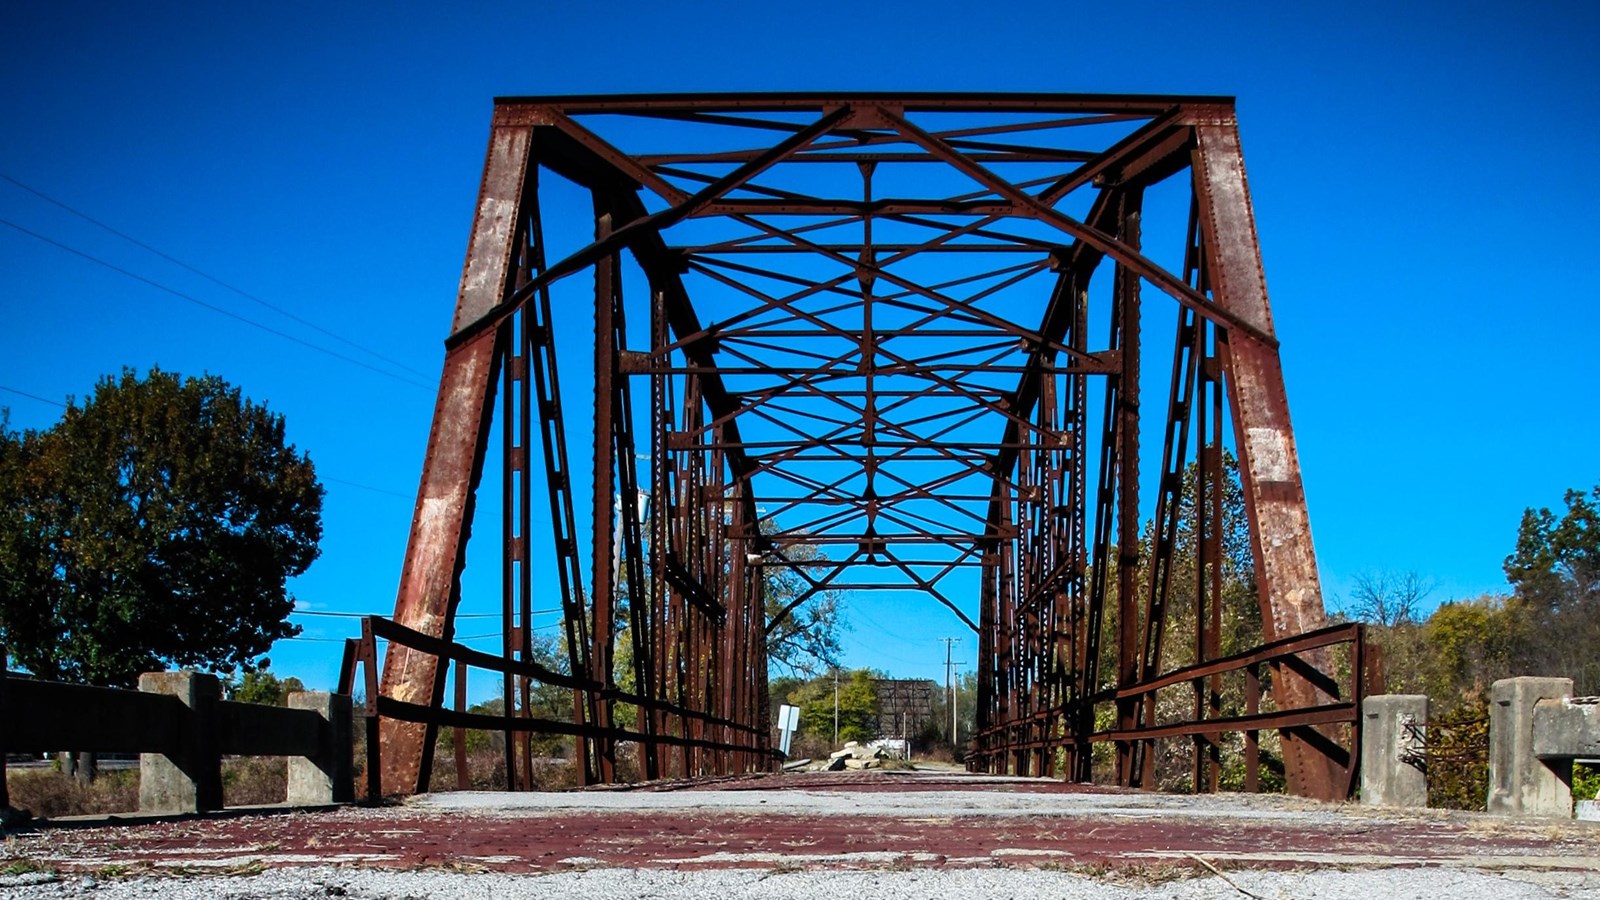 A road with a Route 66 logo leads up to a rusted steel-truss bridge.